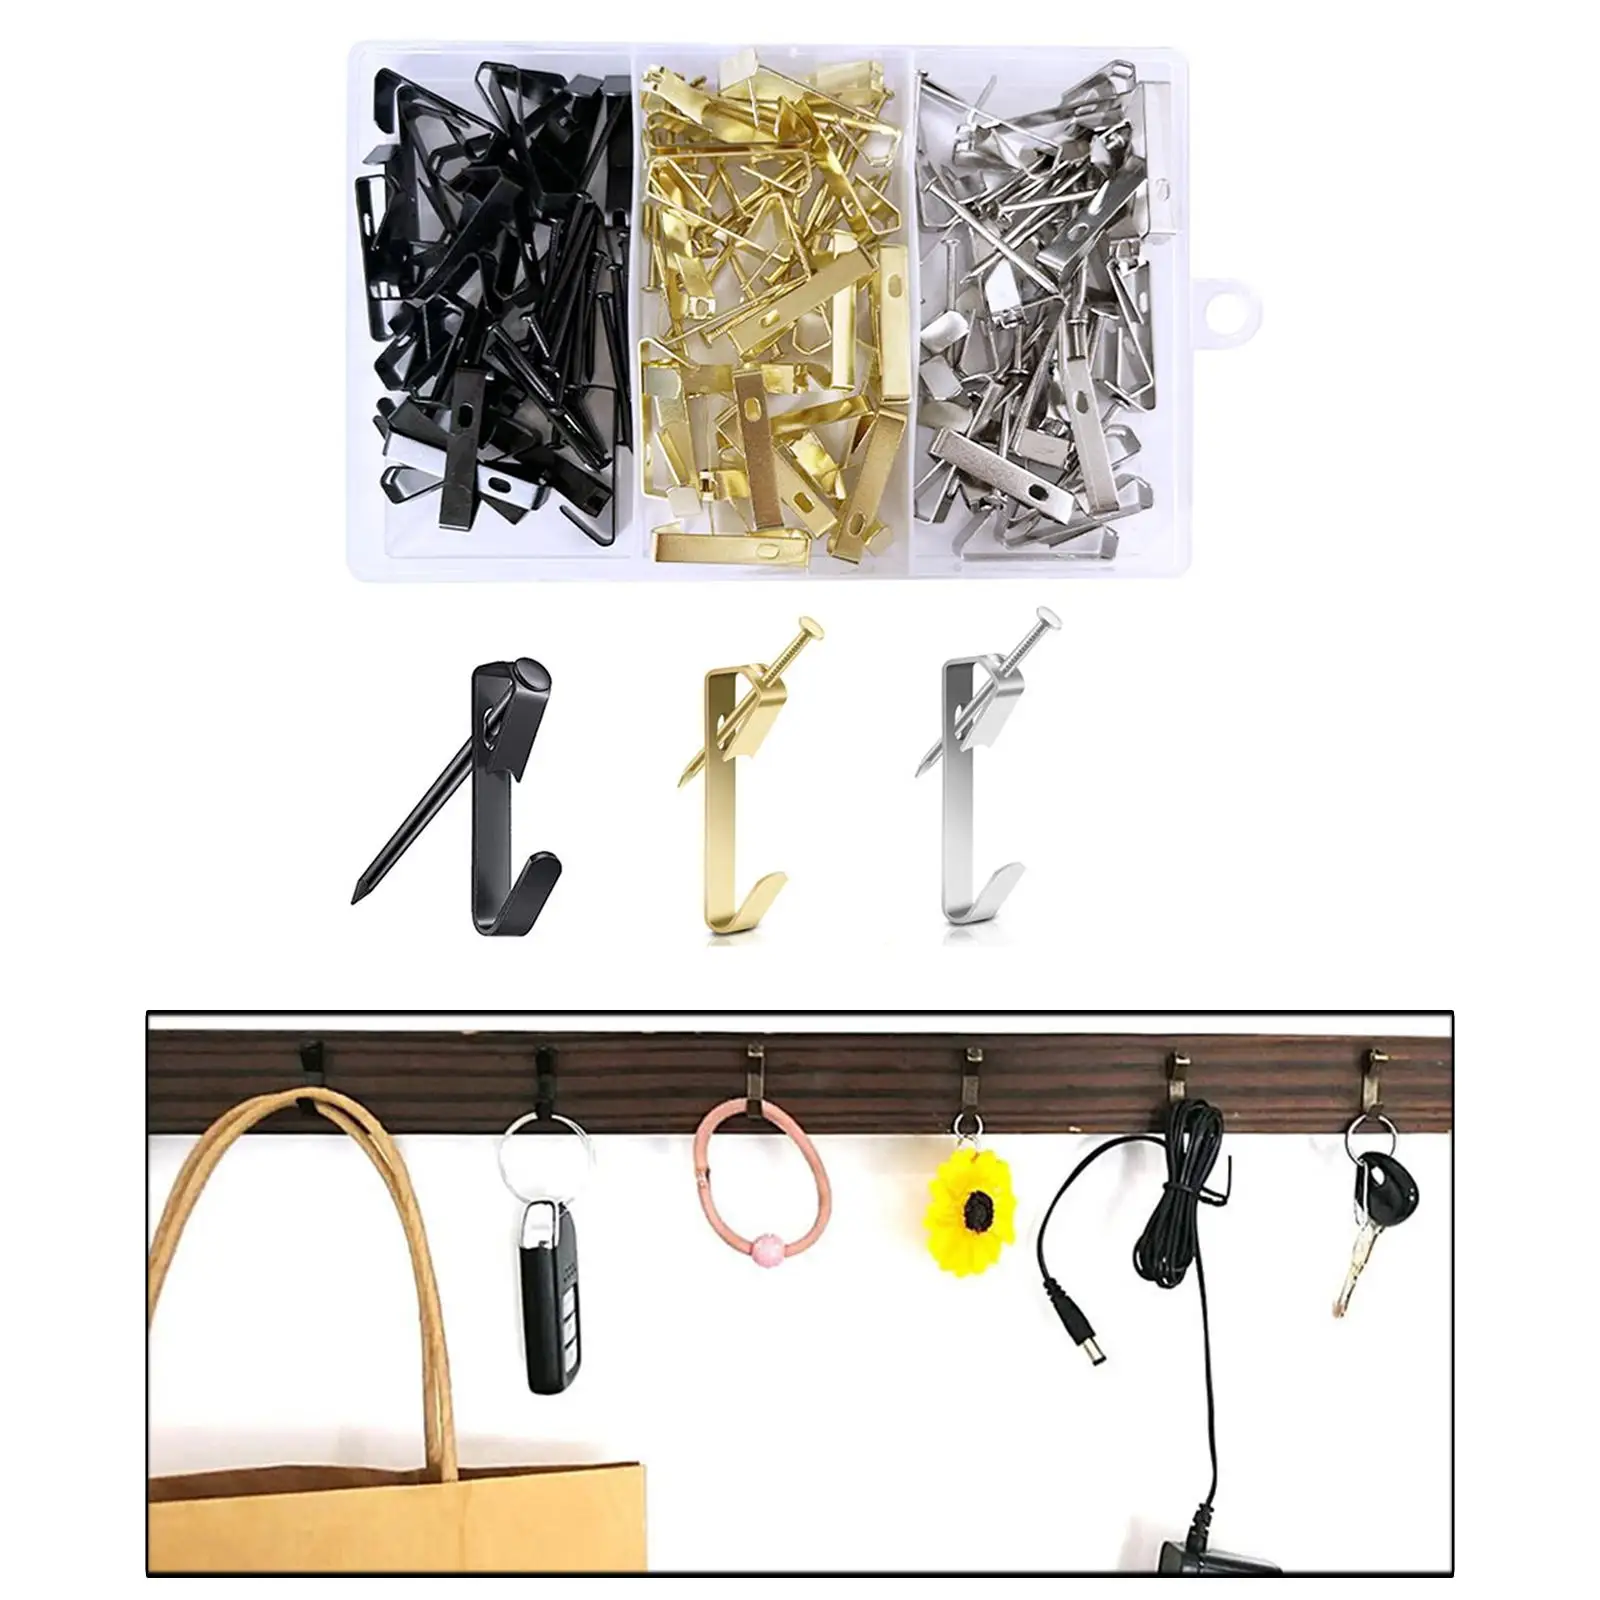 75x Picture Hangers Reusable Picture Hanging Hooks for Clothes Photos Keys